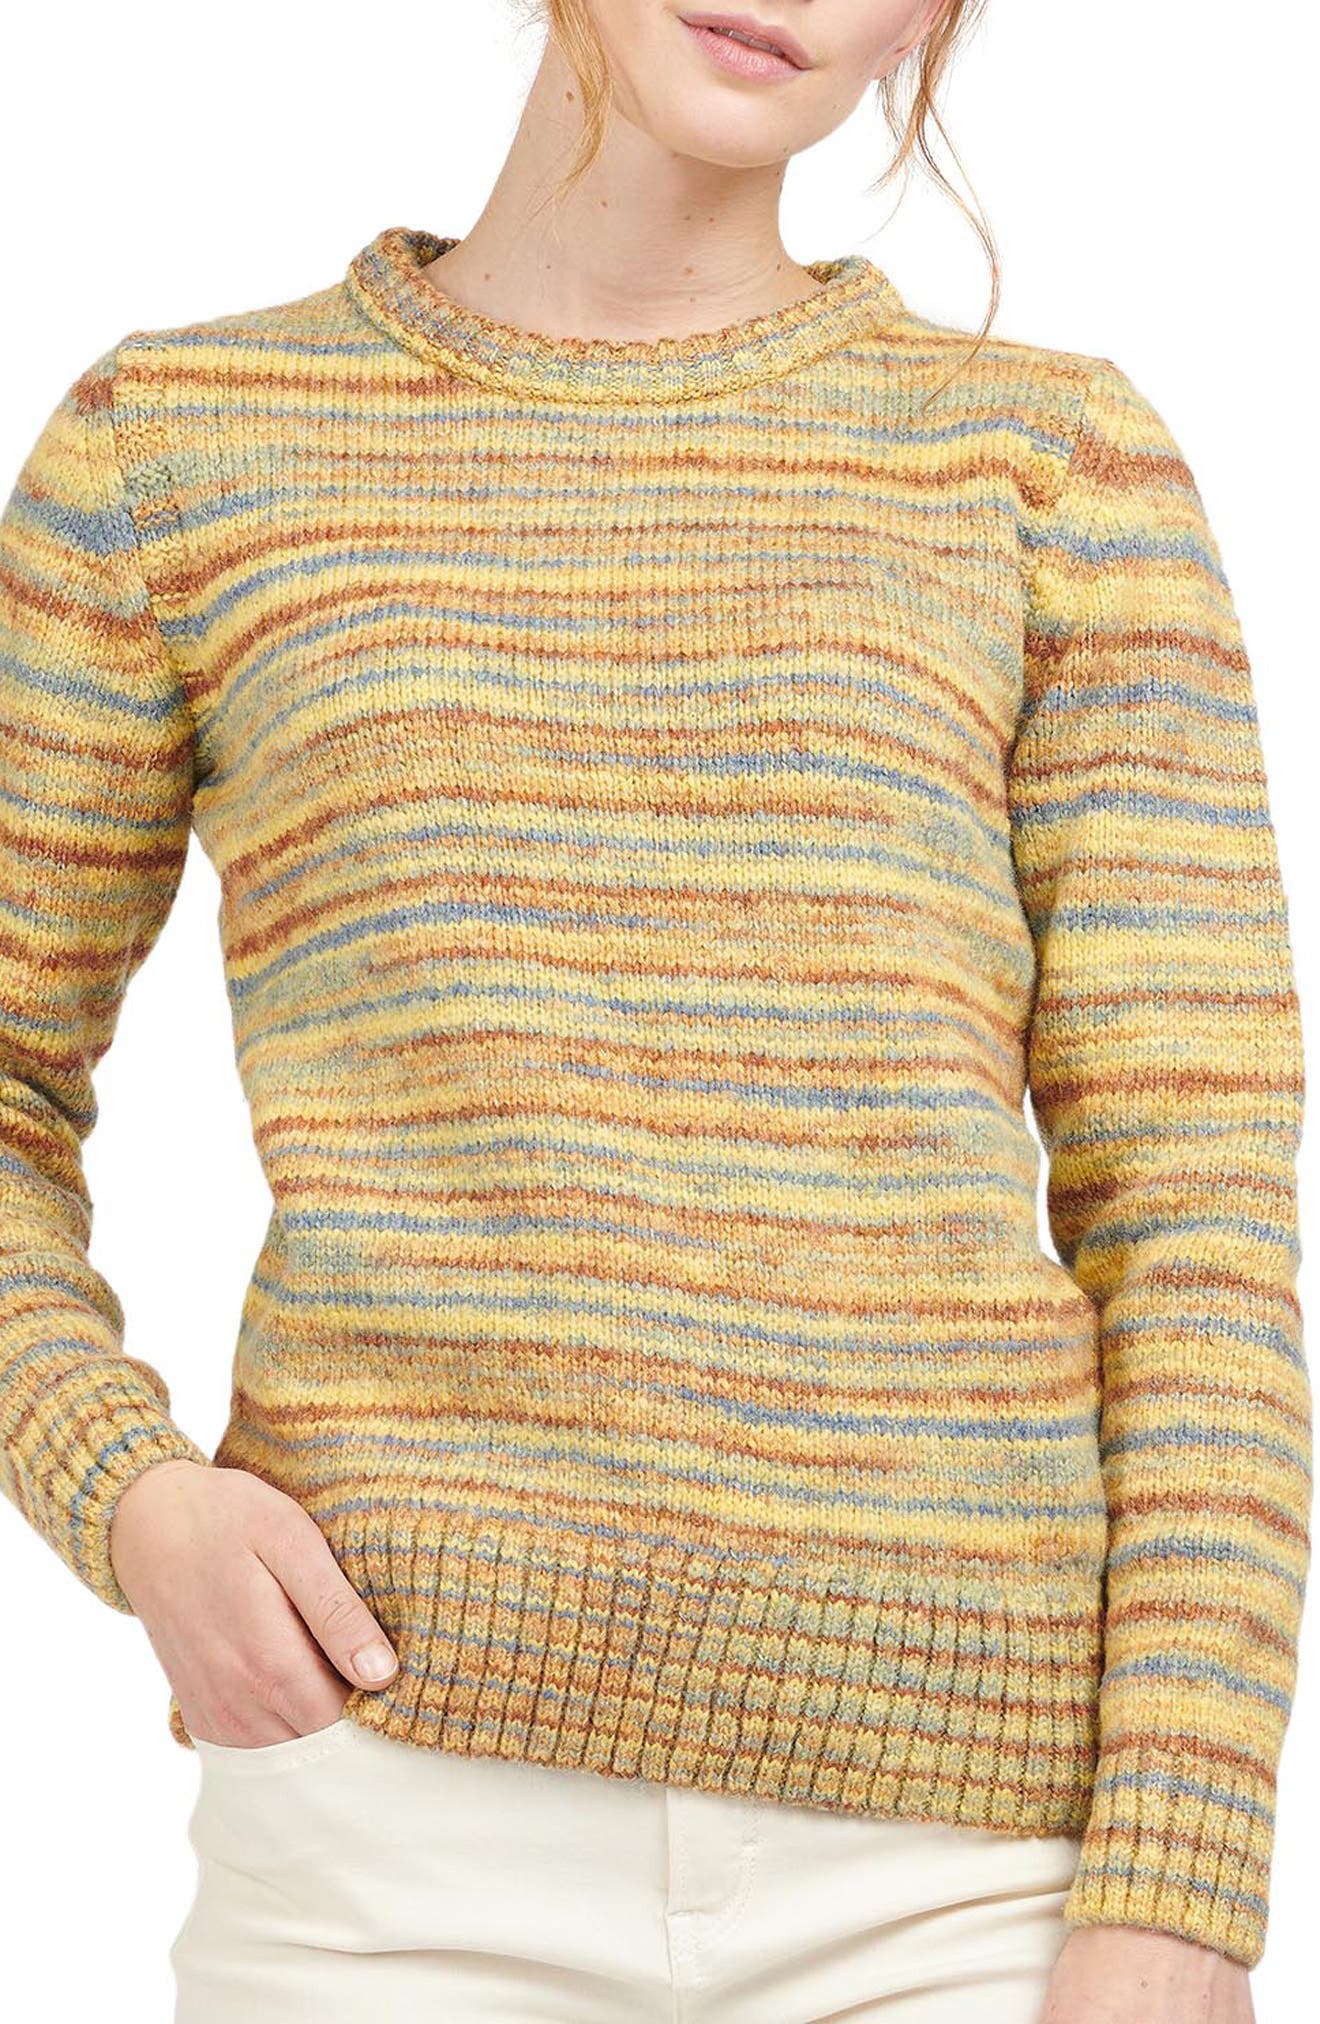 Barbour Burford Stripe Wool Blend Sweater in Yellow Multi at Nordstrom